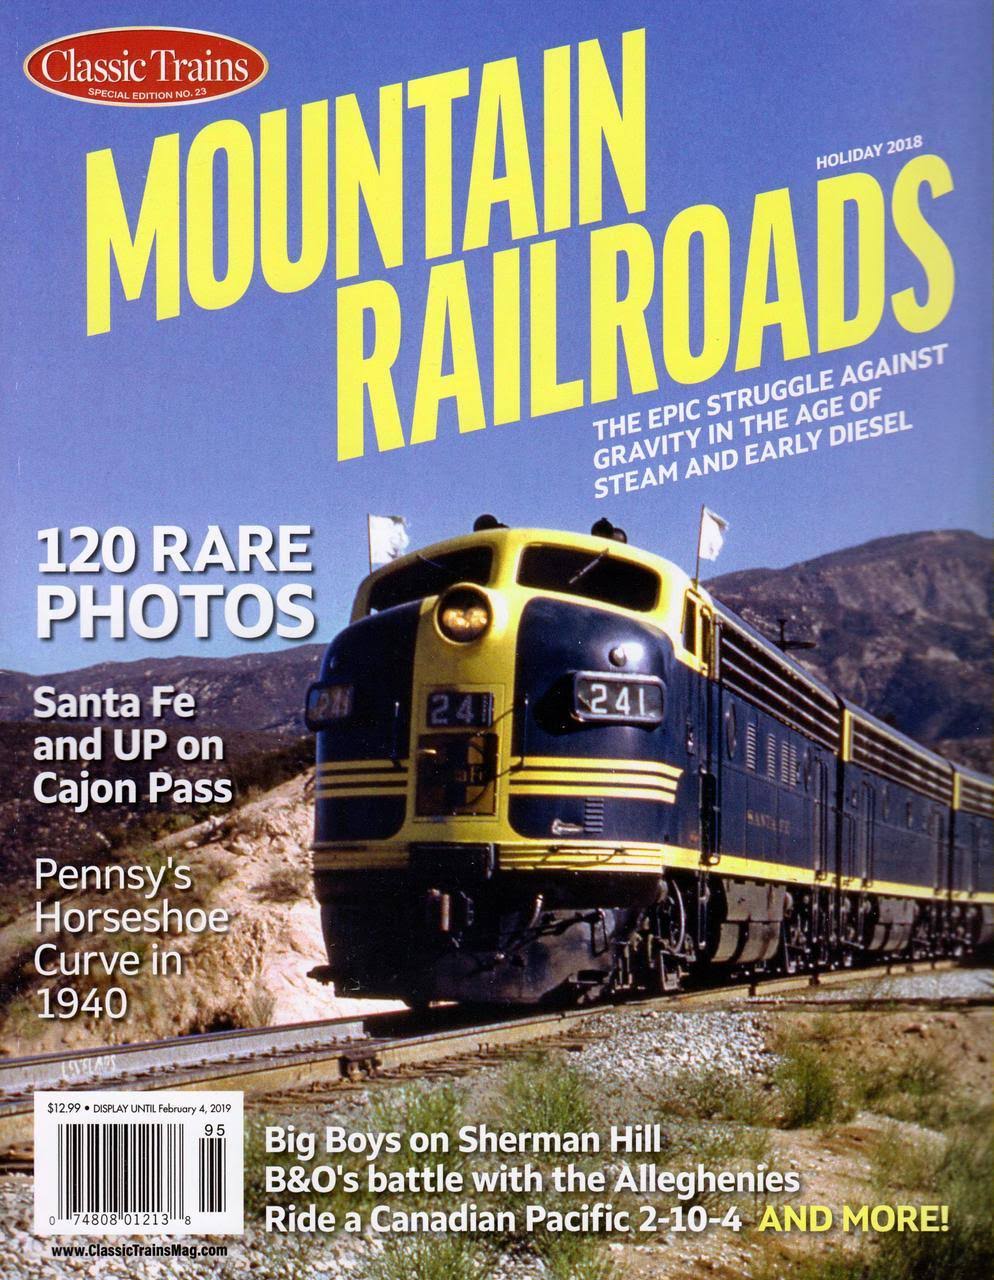 Classic Trains of The 1970s Magazine